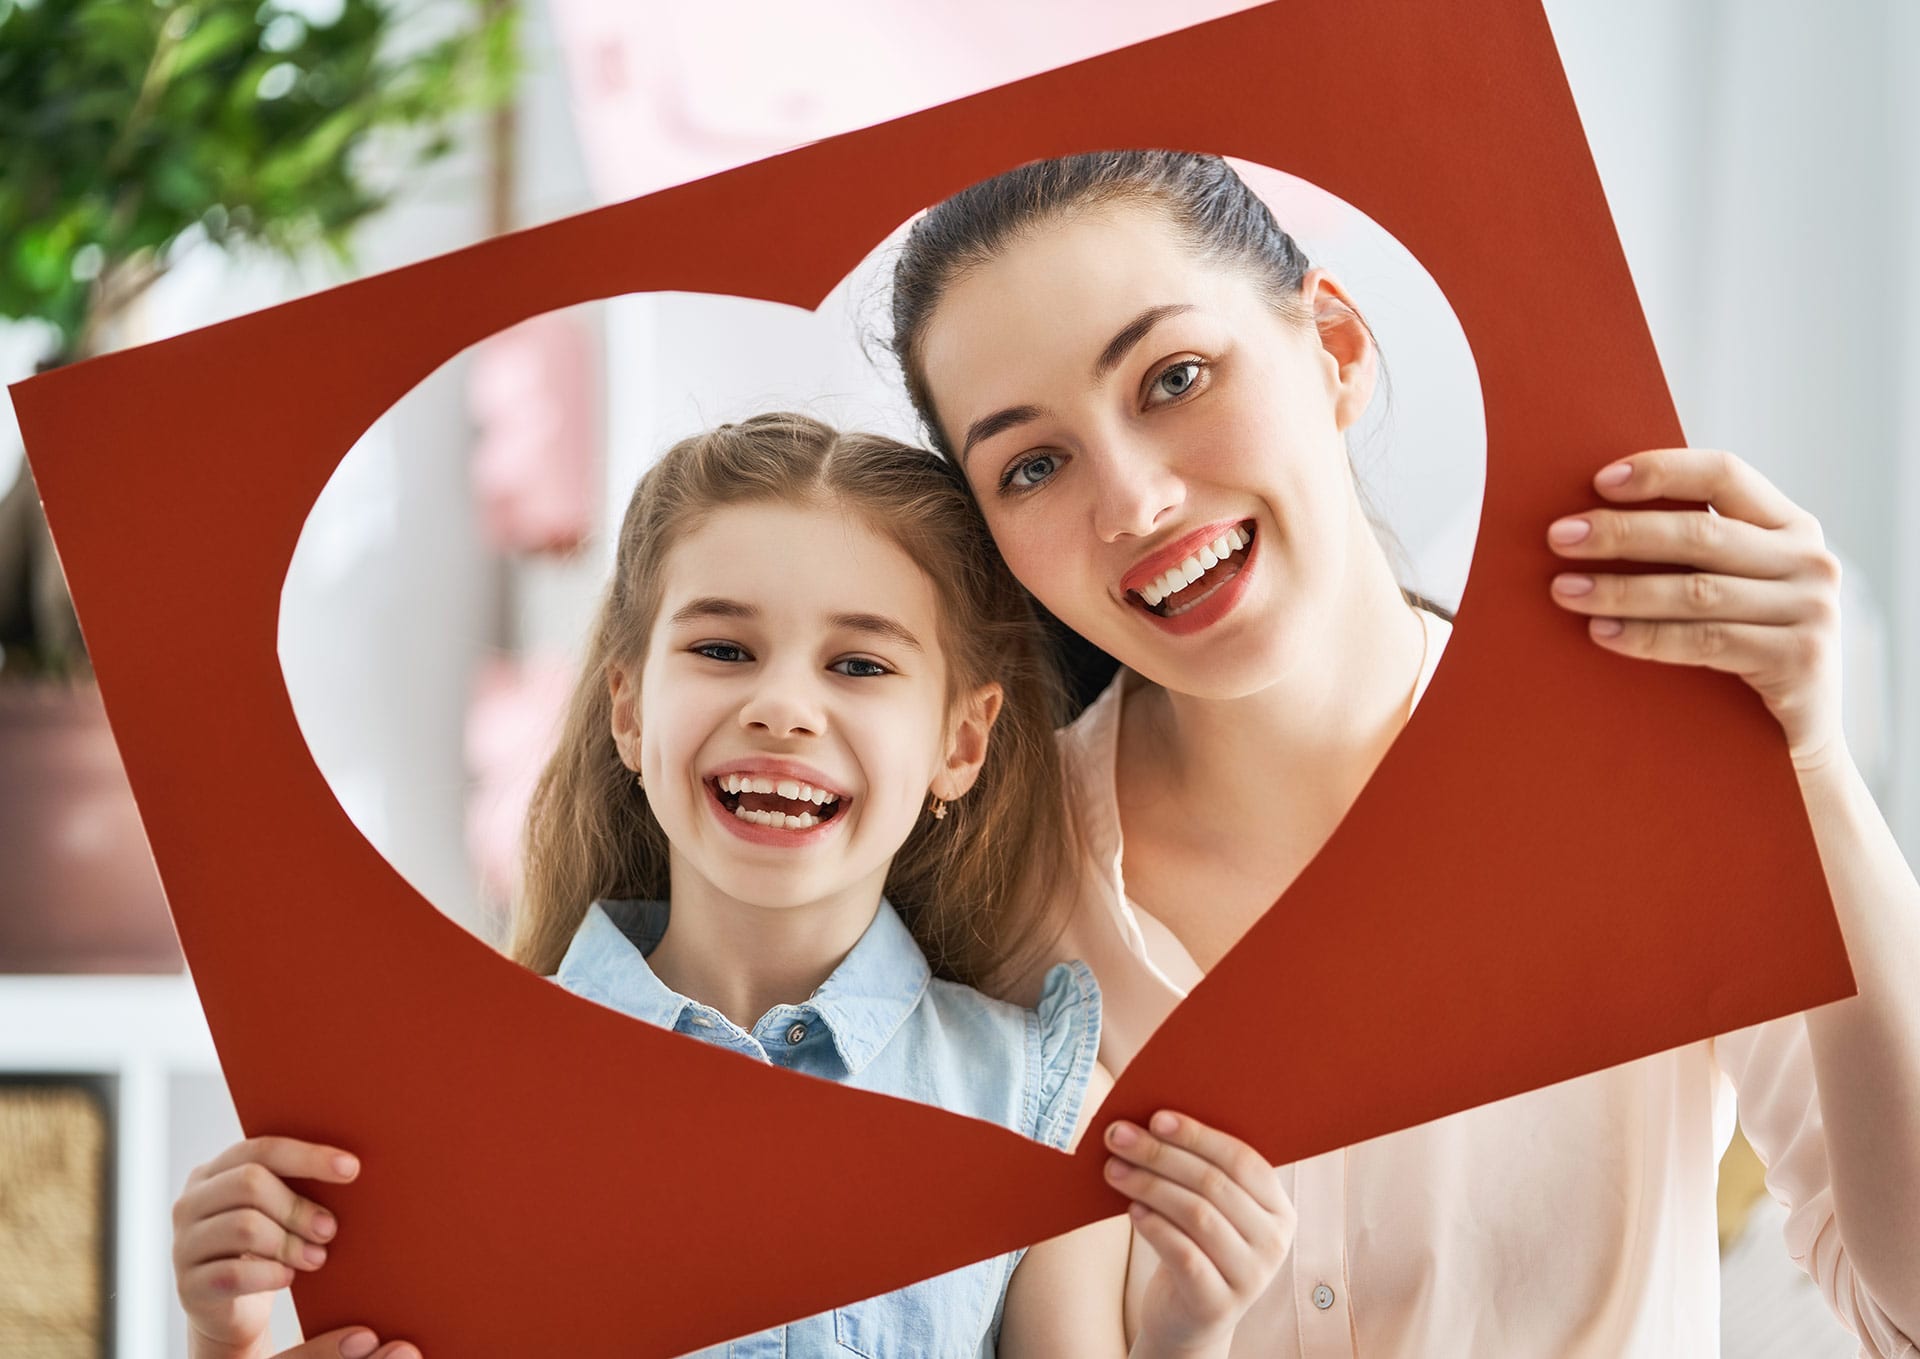 Mother and daughter smiling through a large cutout heart frame after strightening their teeth